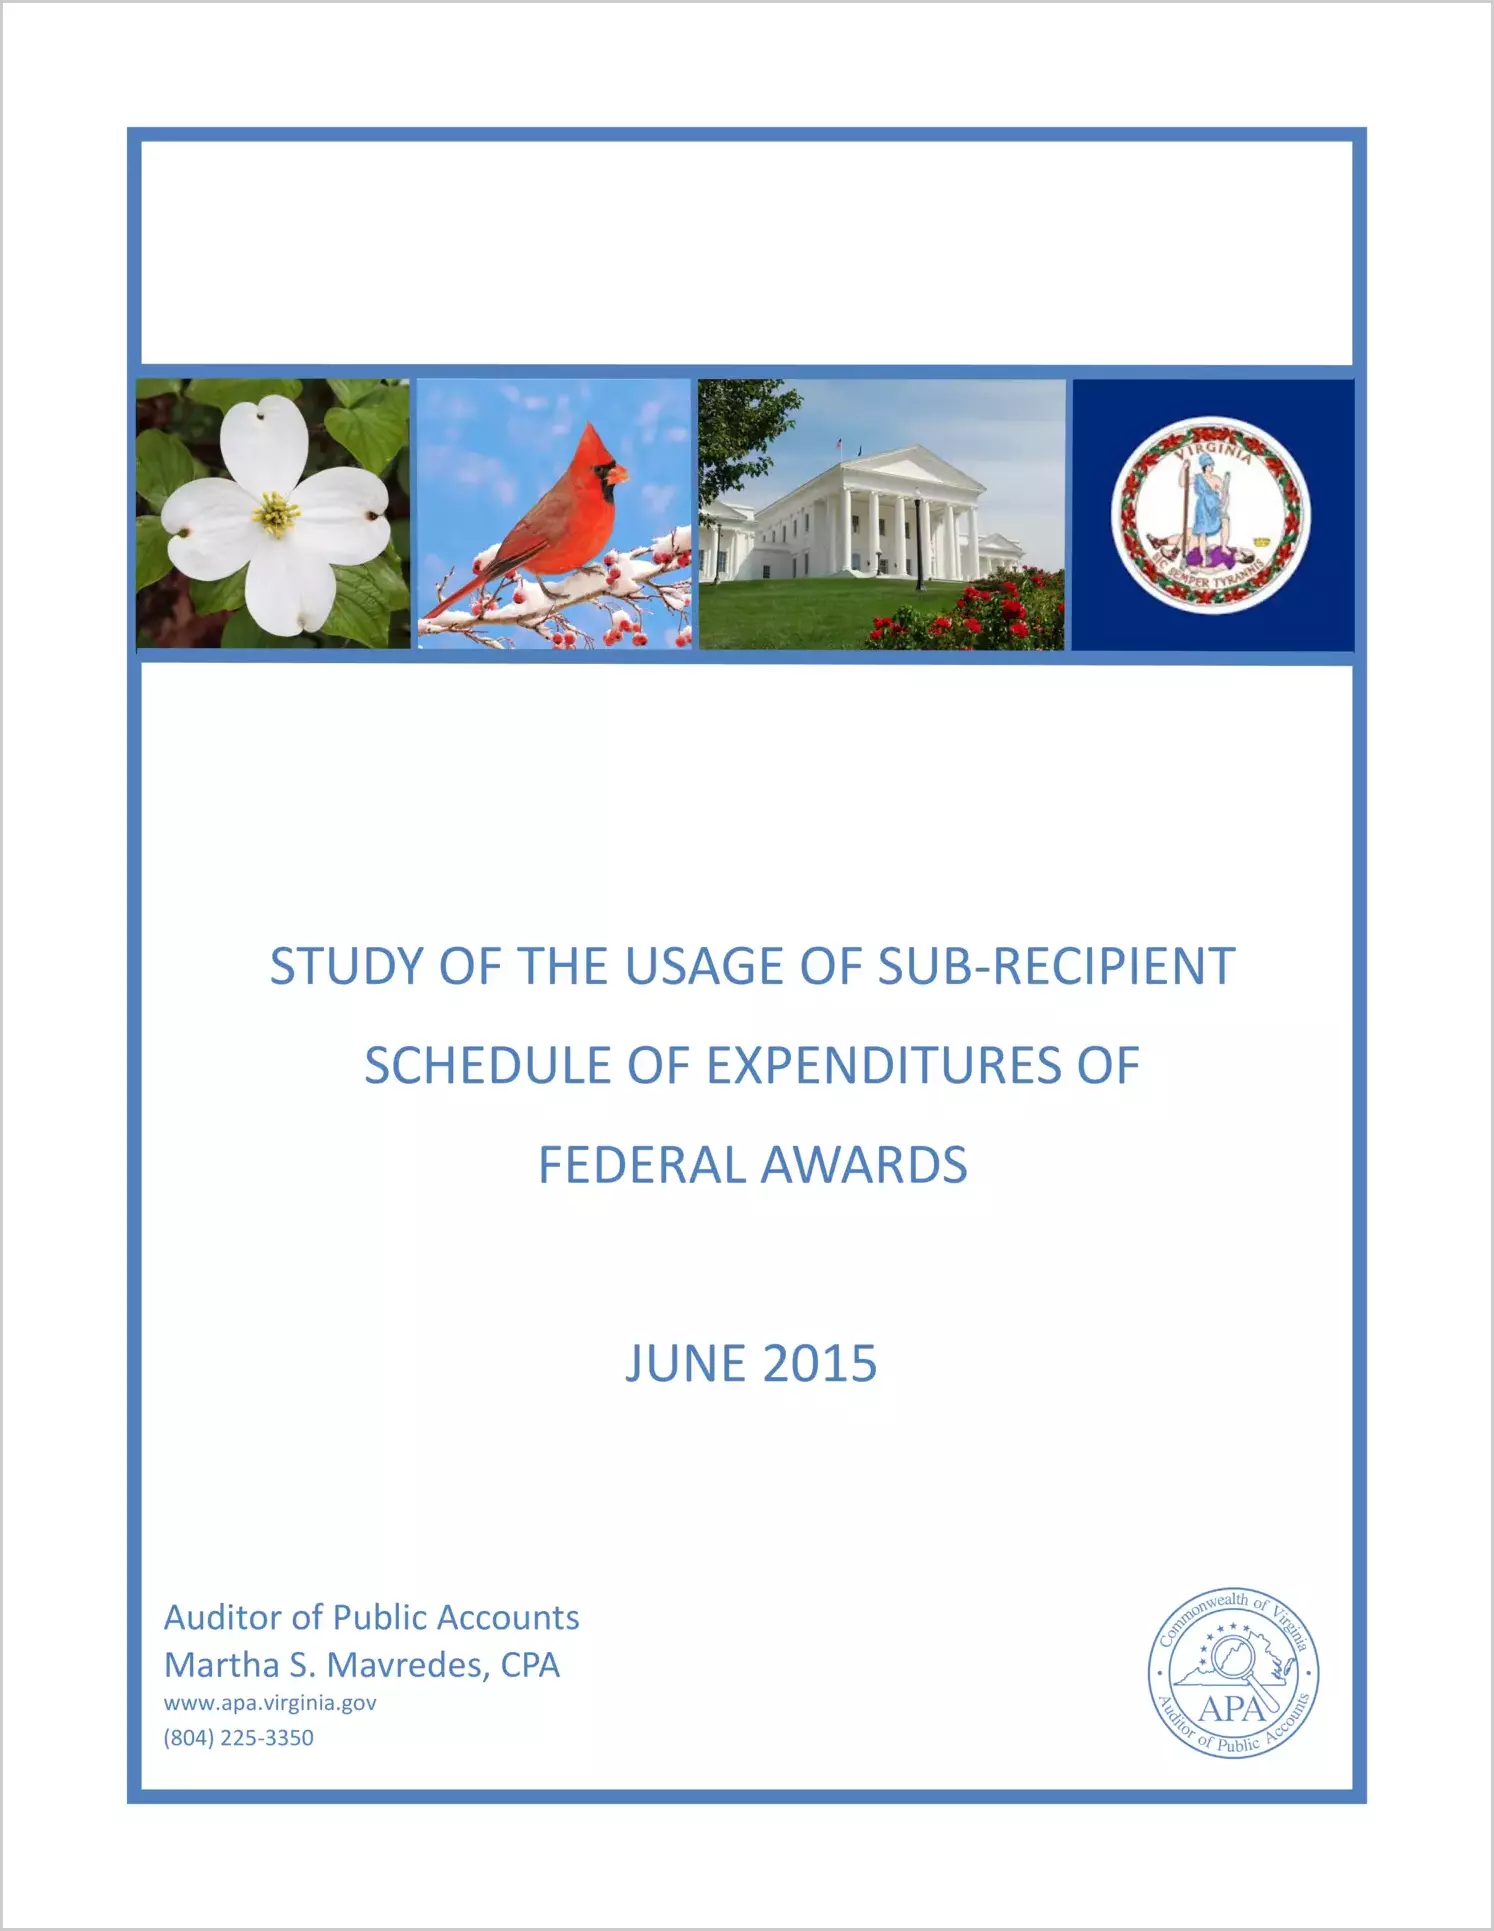 Study of the Usage of Sub-recipient Schedule of Expenditures of Federal Awards - June 2015